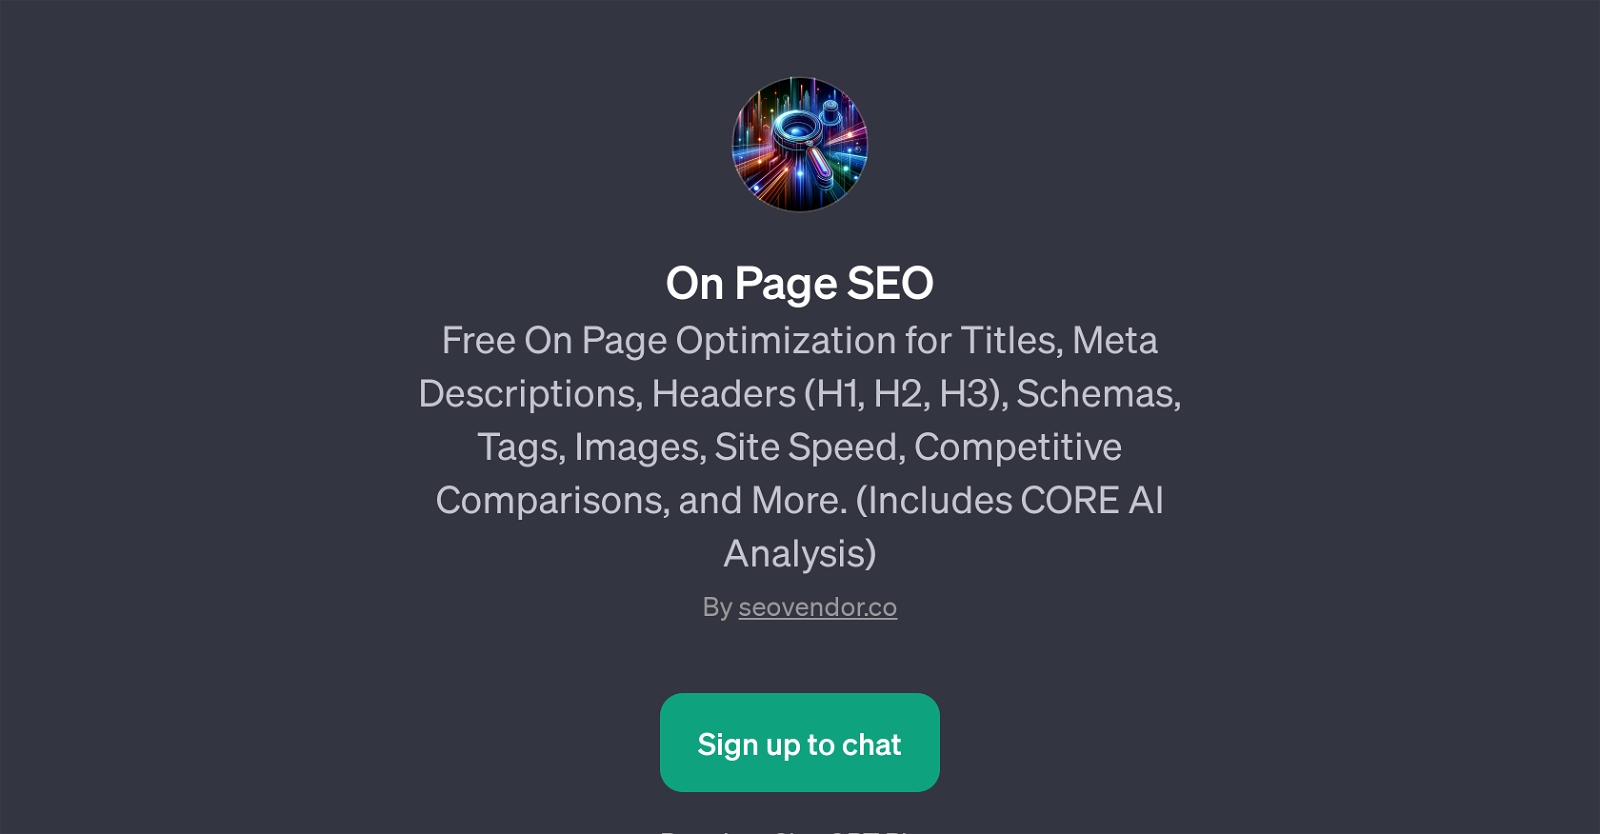 On Page SEO website